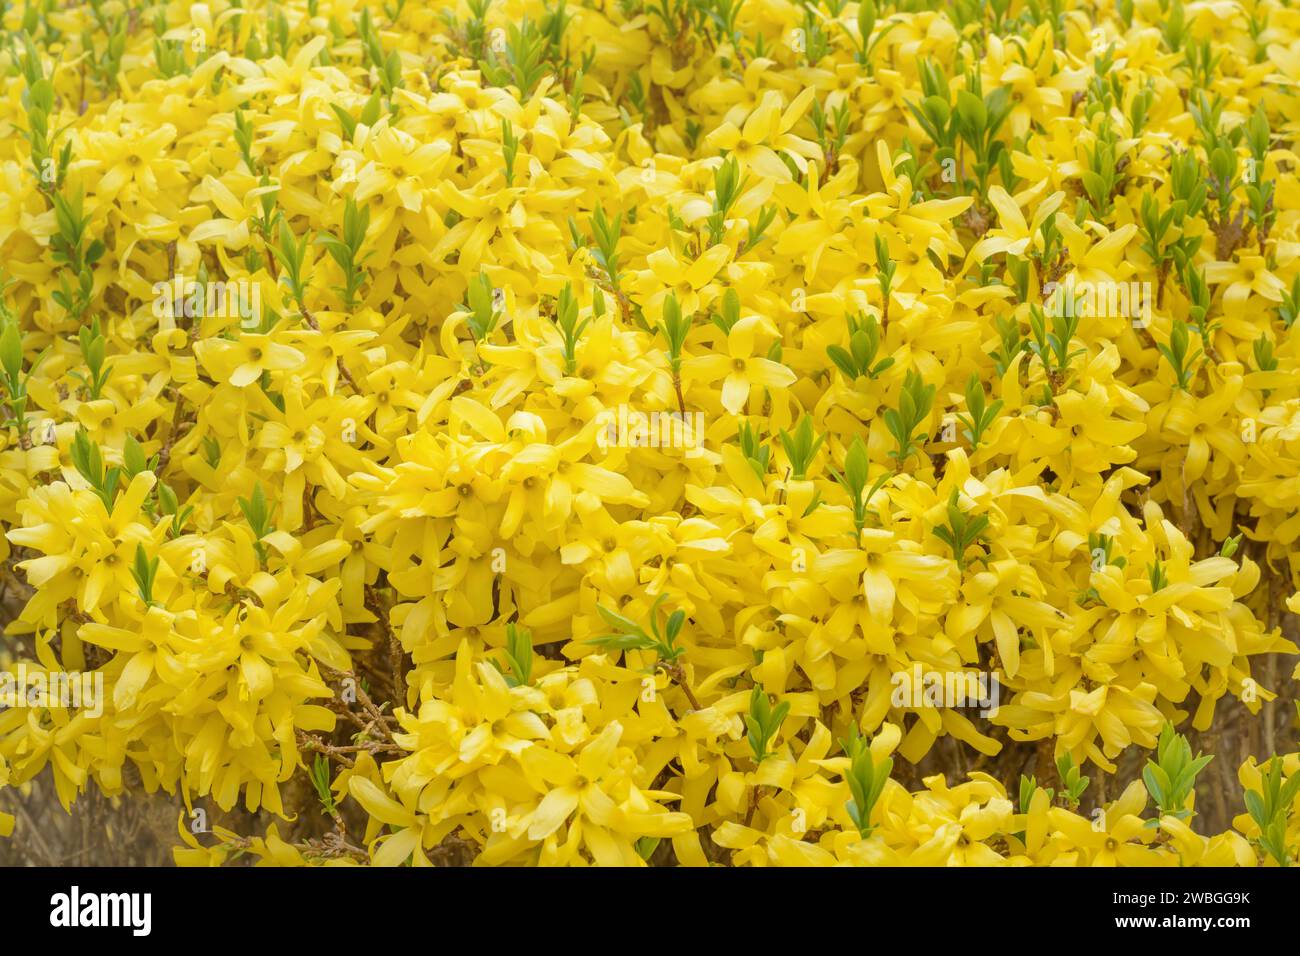 Forsythia flowers with small green leaves Stock Photo